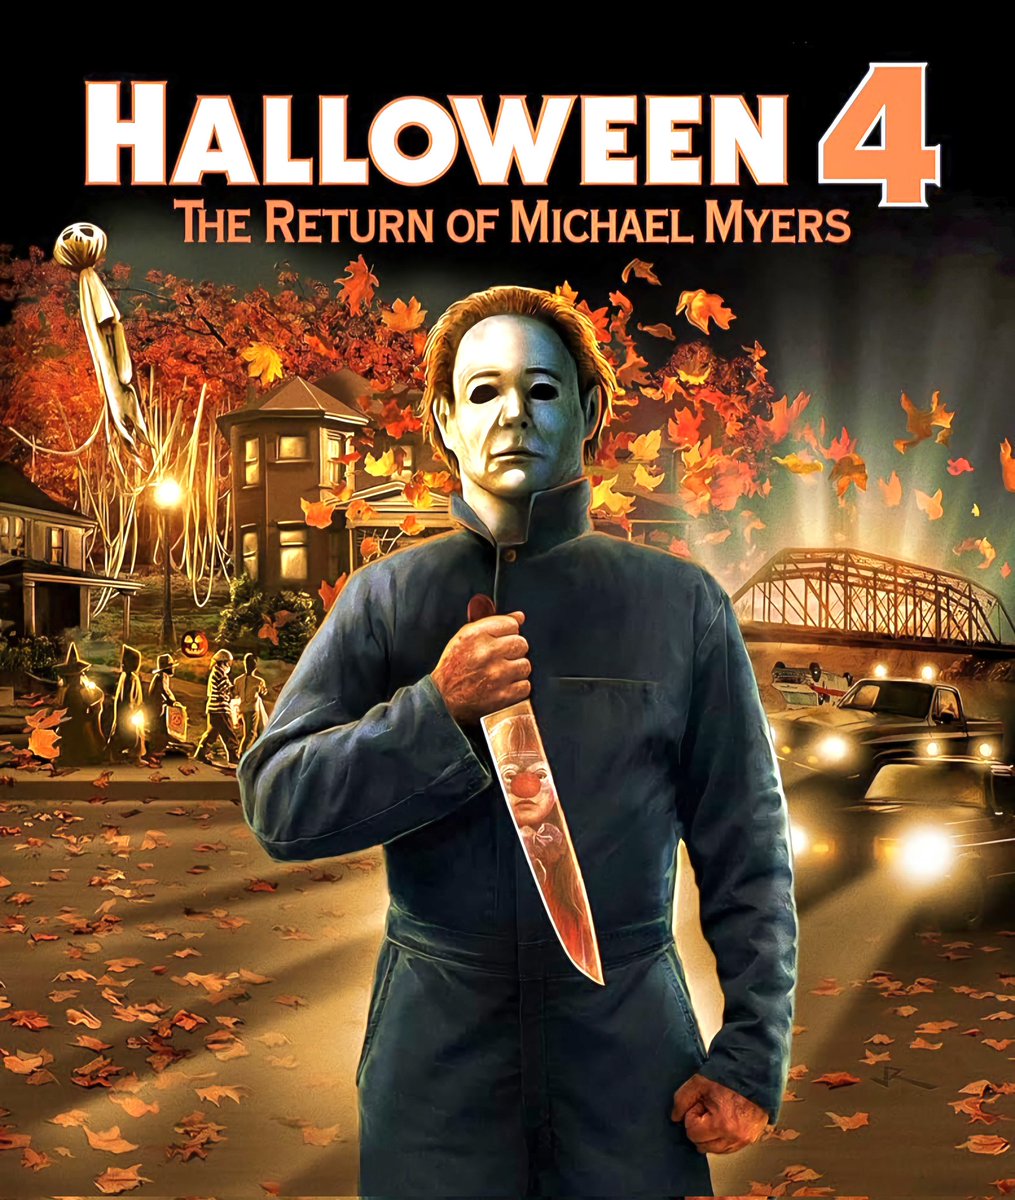 Now for HALLOWEEN 4: THE RETURN OF MICHAEL MYERS (1988). Ten years after his original massacre, the comatose maniac Michael Myers awakens on Halloween Eve and returns to Haddonfield to kill his seven-year-old niece. Can Dr. Loomis stop him? @PromoteHorror